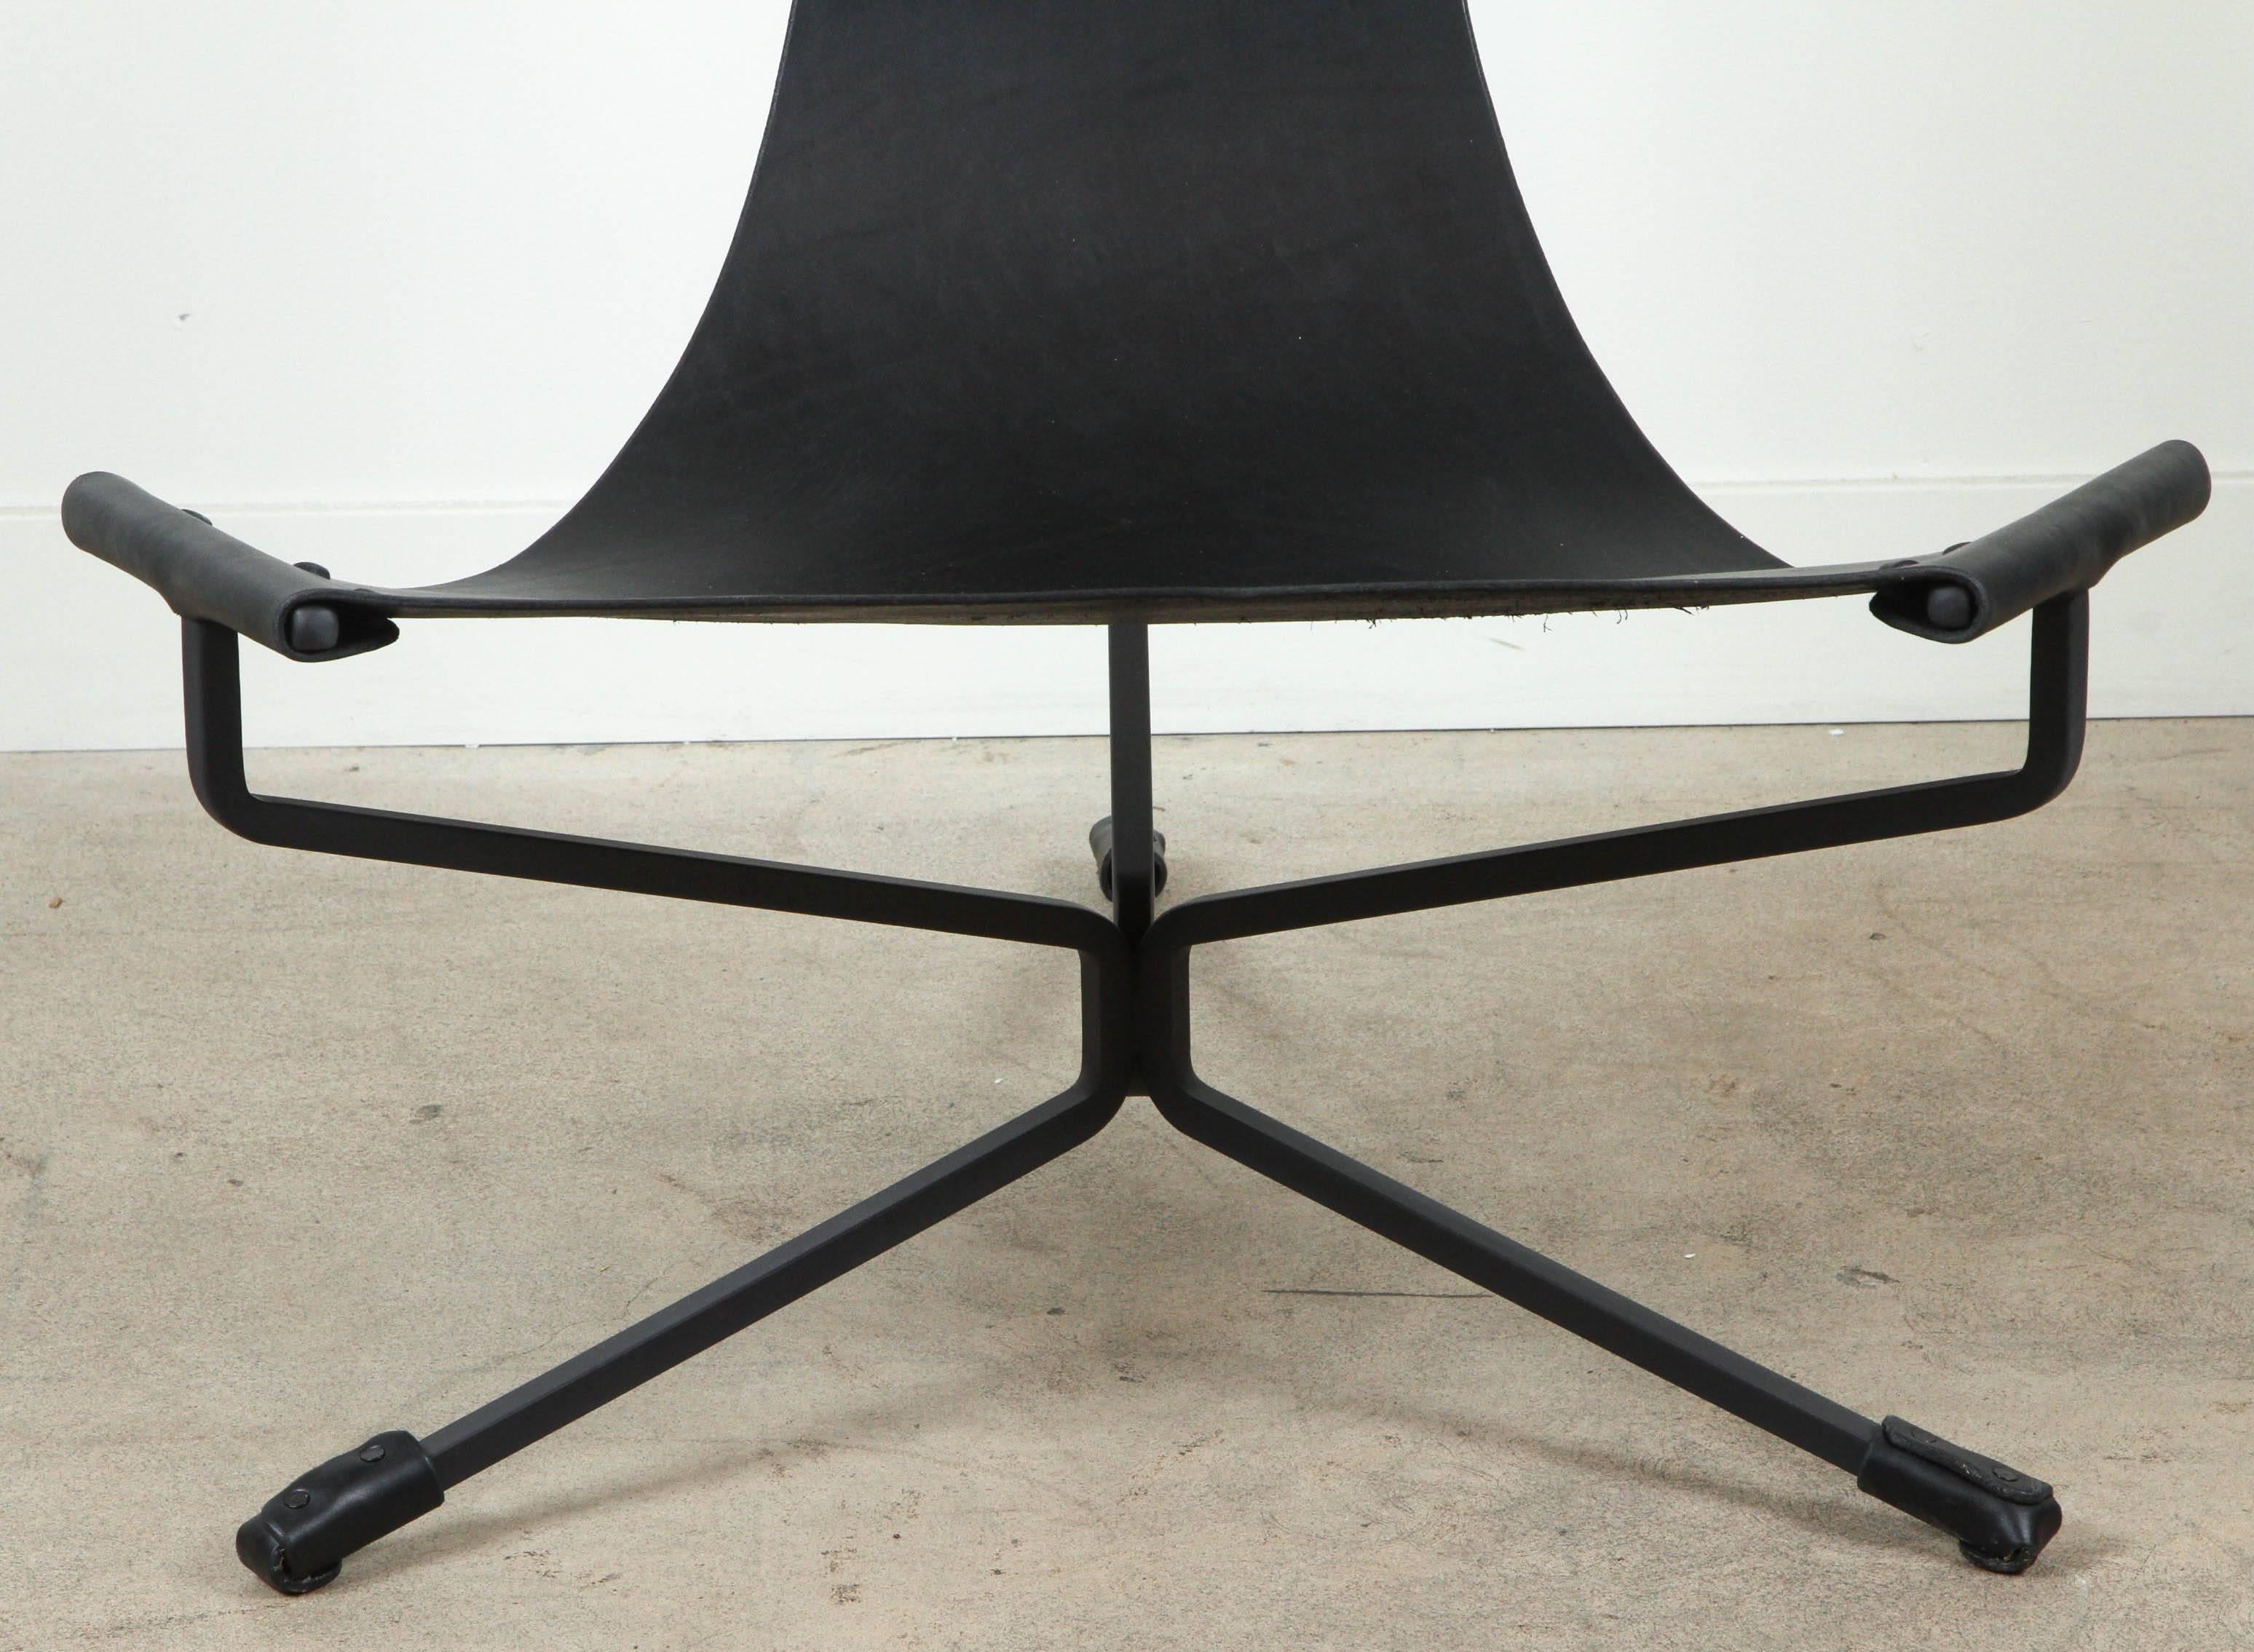 Lotus chair by Daniel Wenger. Also available in cognac leather.